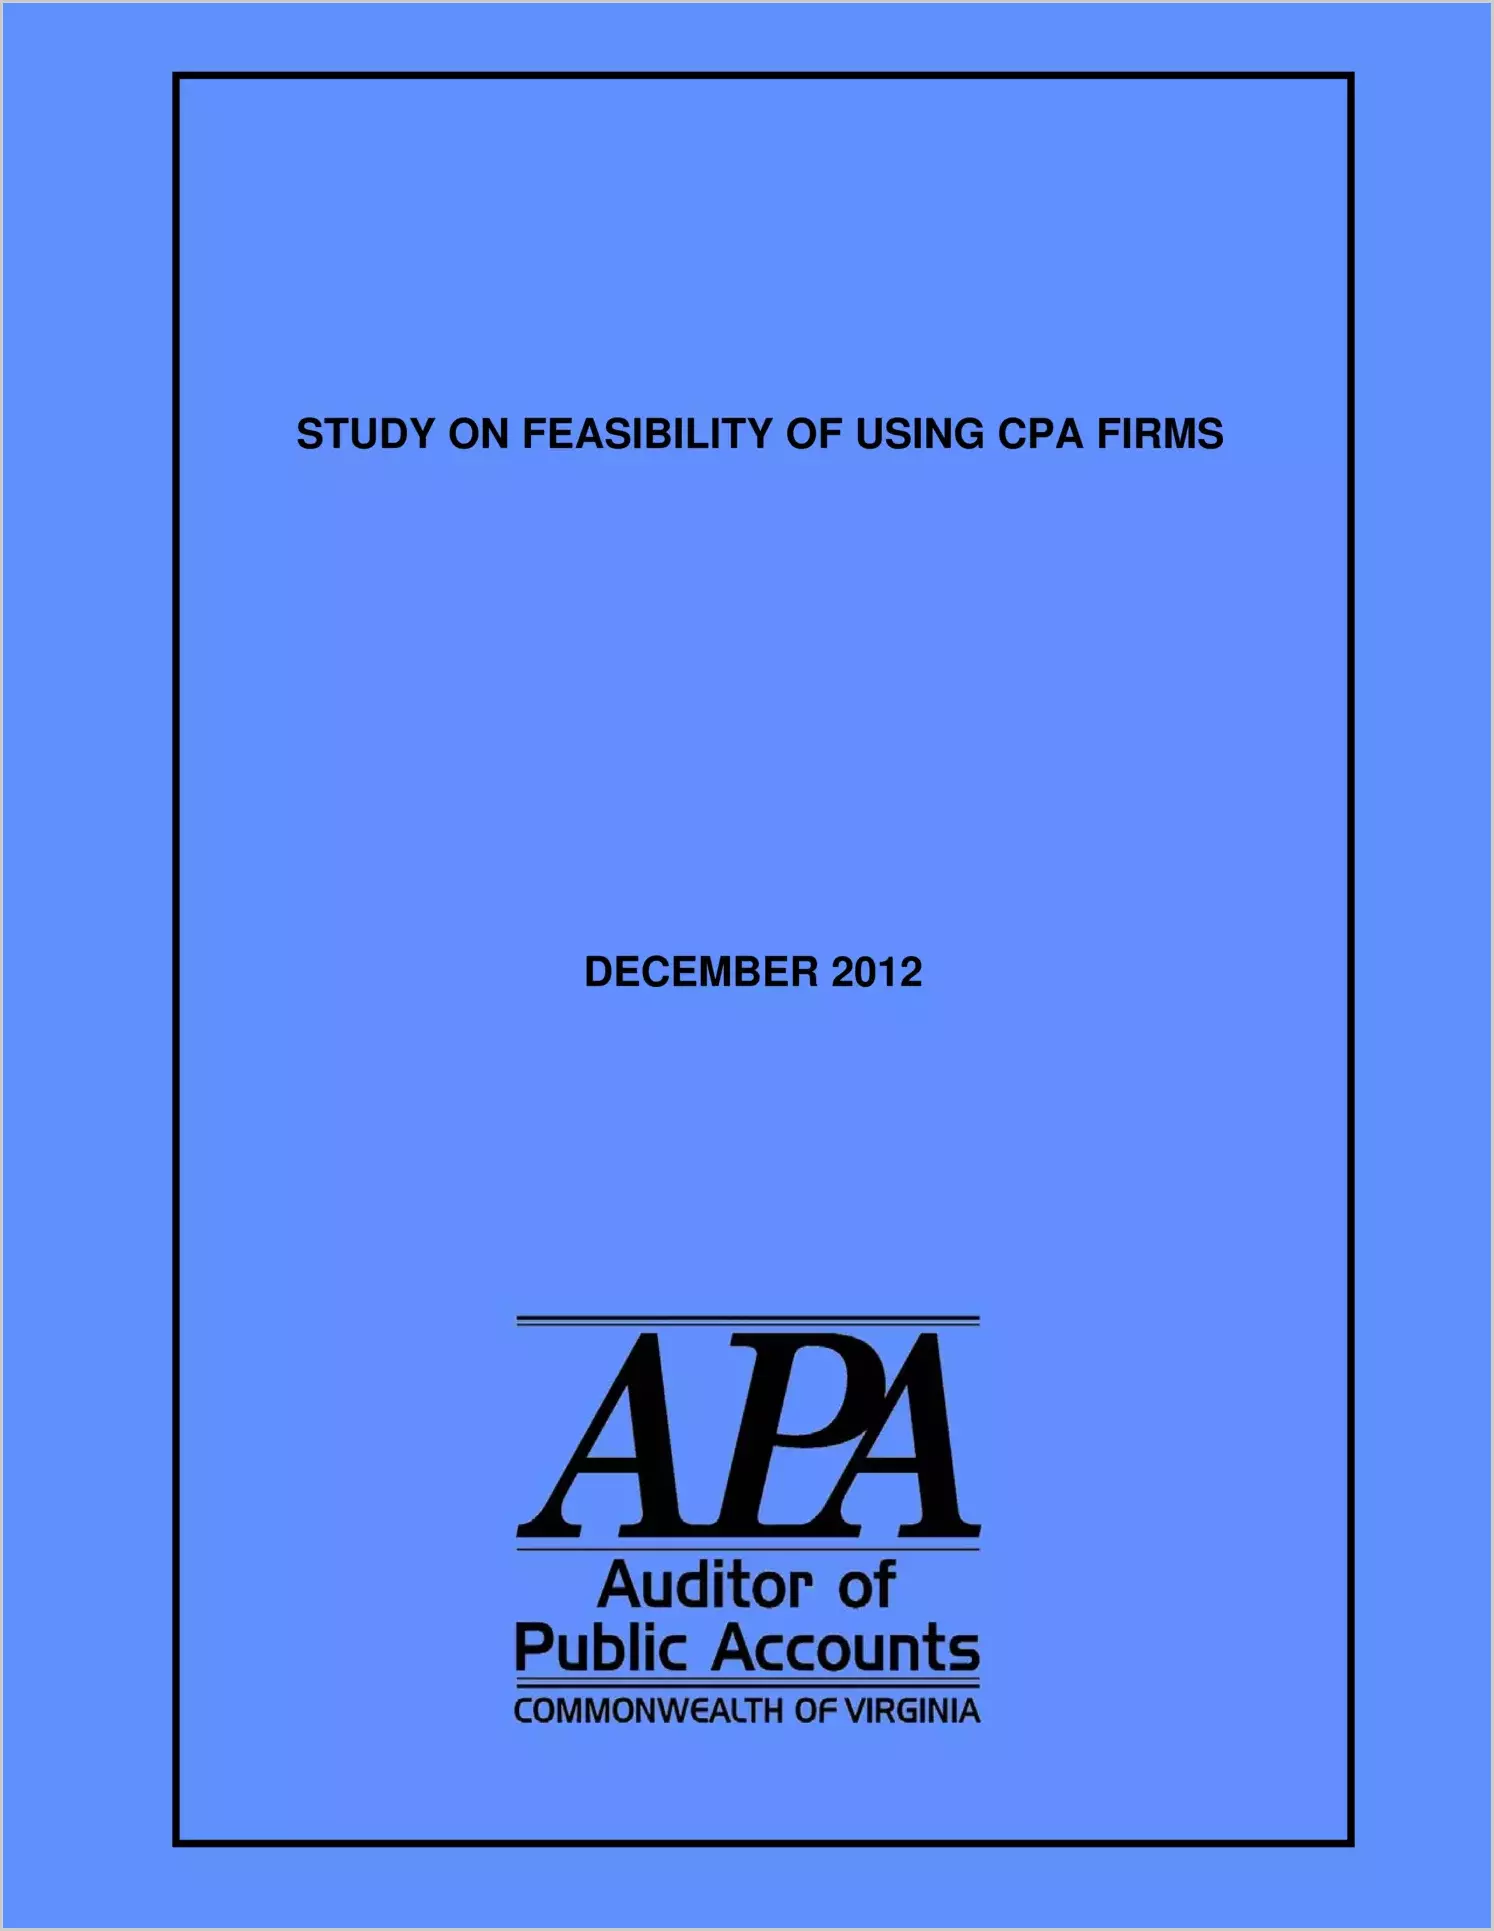 Study on Feasibility of Using CPA Firms - December 2012